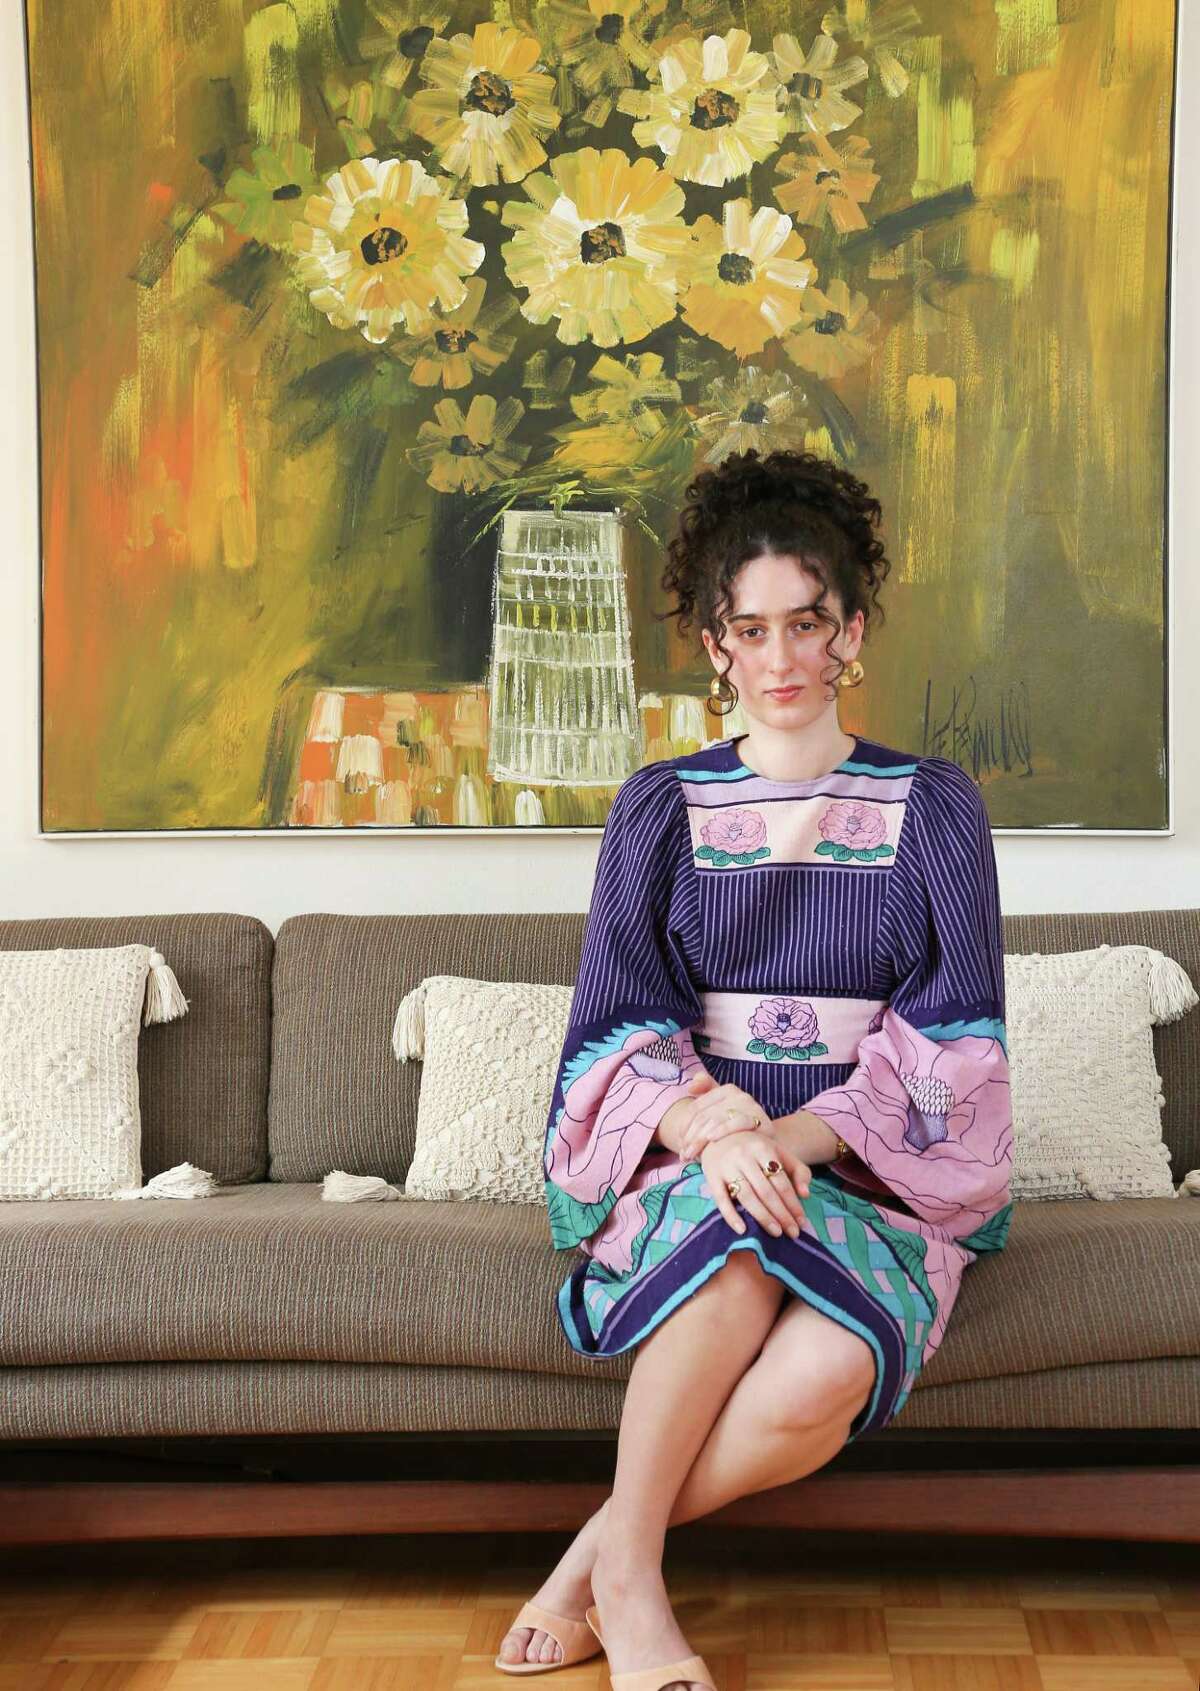 University Houston student Olivia Haroutounian wears a vintage dress from her mom in her family's living room in Houston on Friday, Jan. 29, 2021.